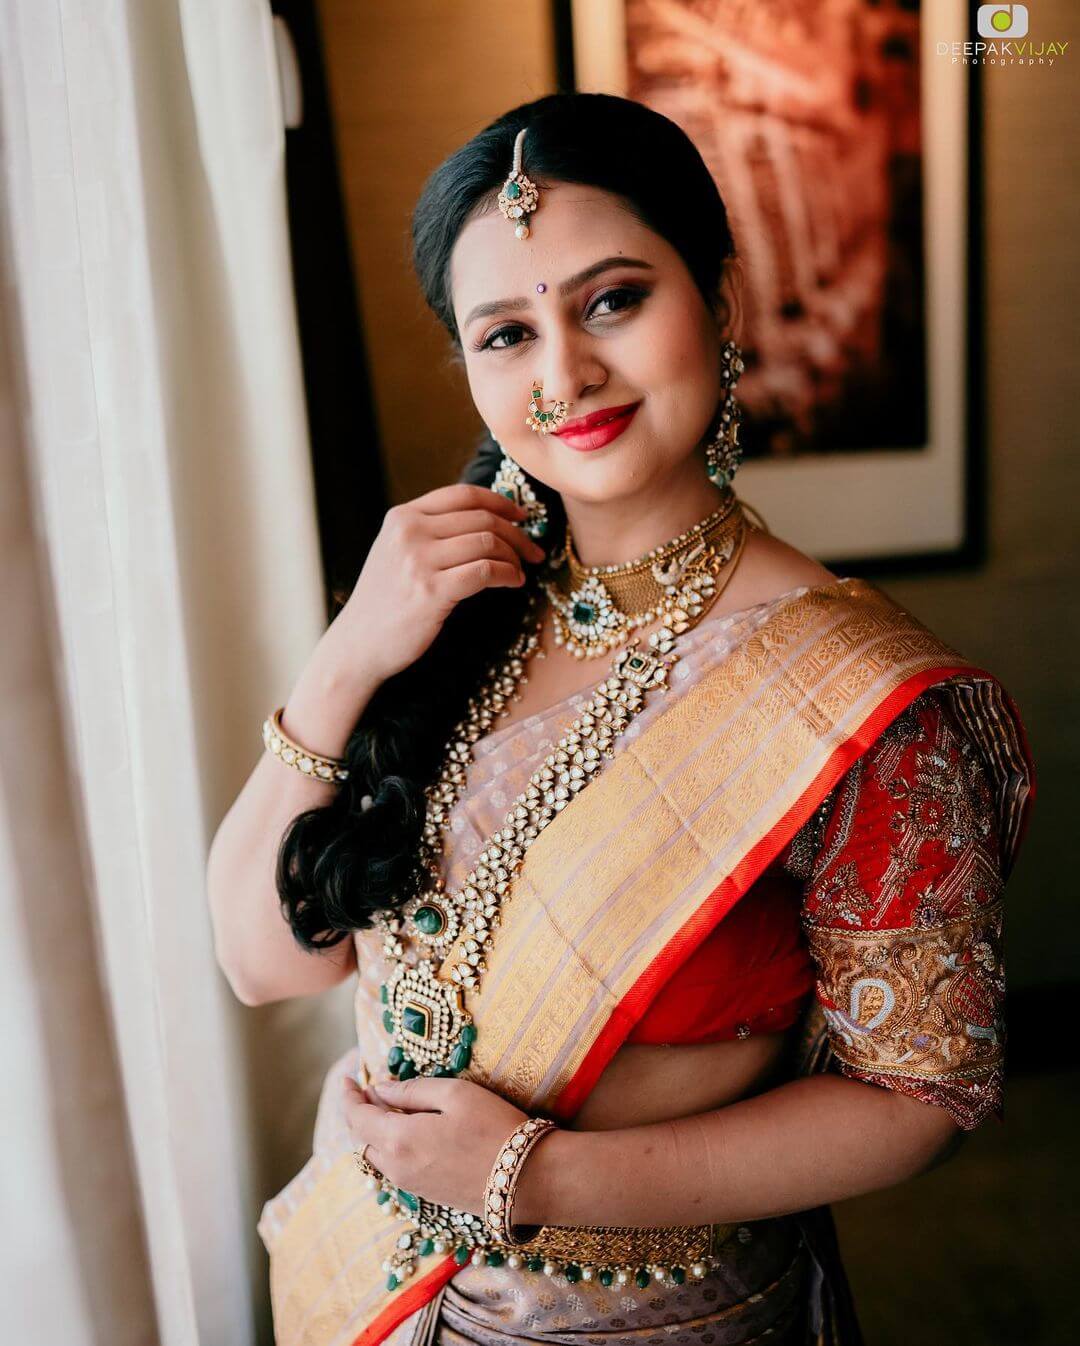 Amulya Look Gorgeous In Off White Golden Zari Saree Border & Red Blouse Paired With Kundan Jewellery